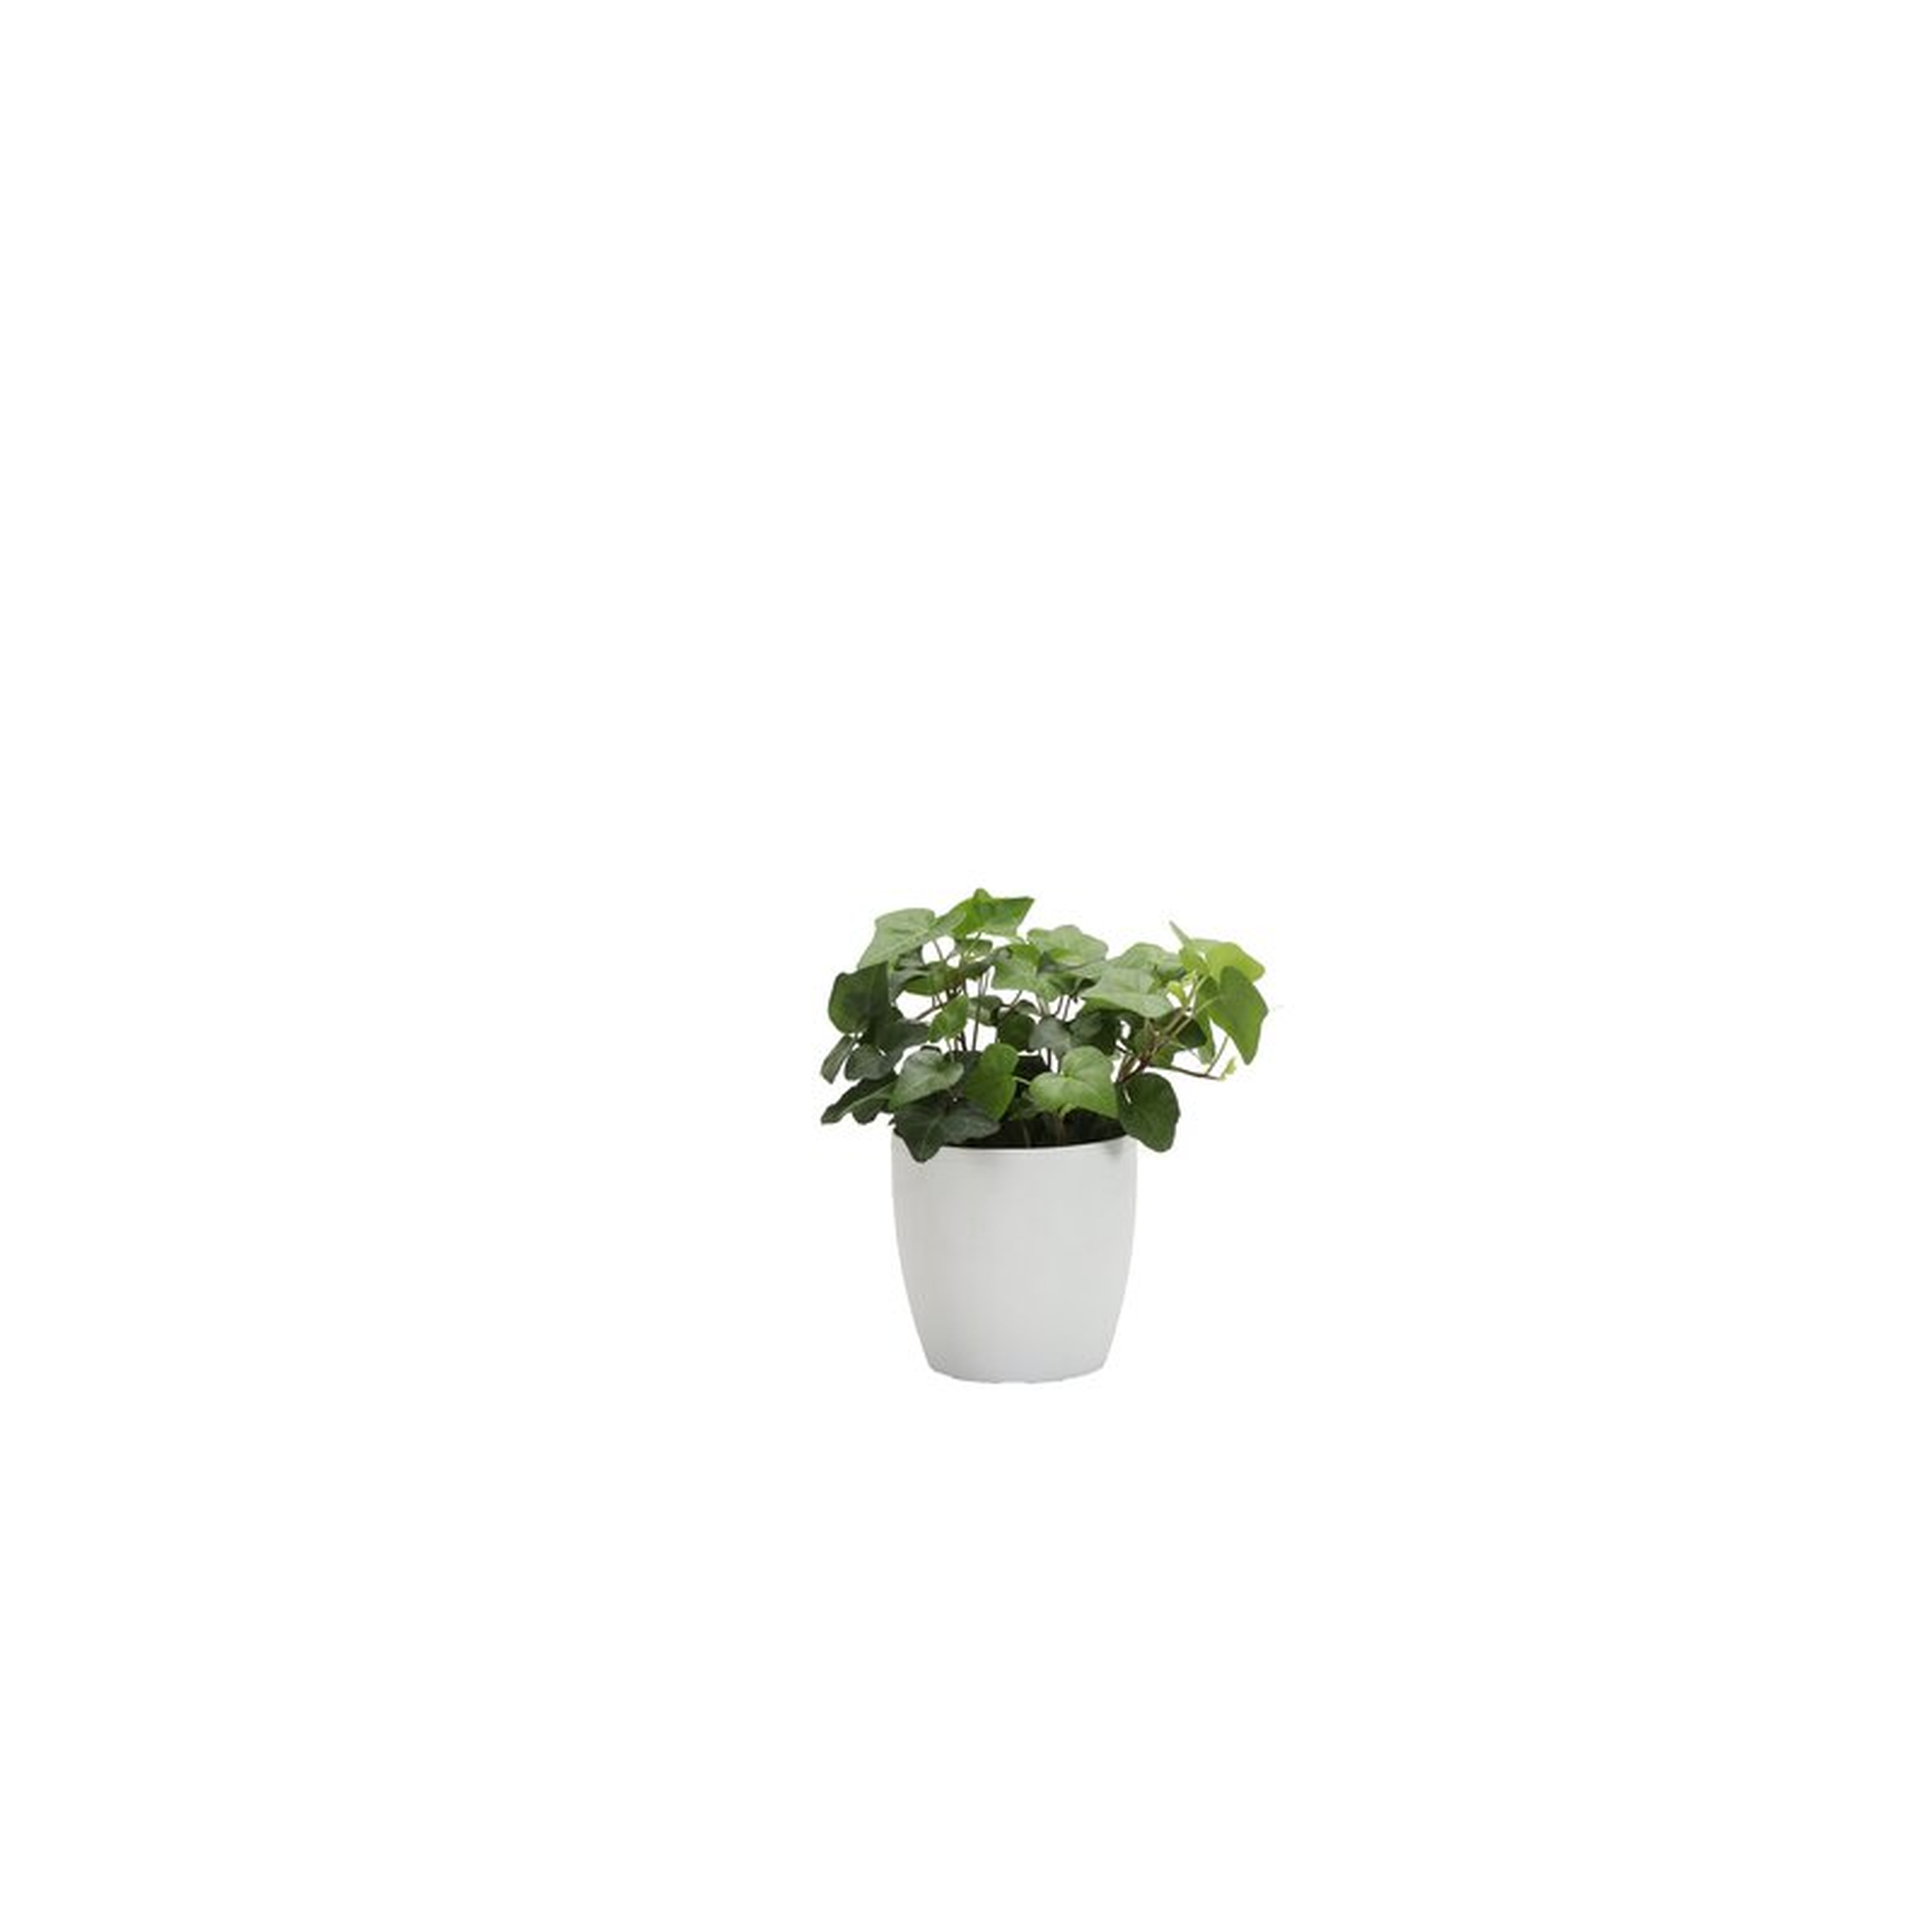 Thorsen's Greenhouse Live Green Ivy Plant in Classic Pot - Perigold